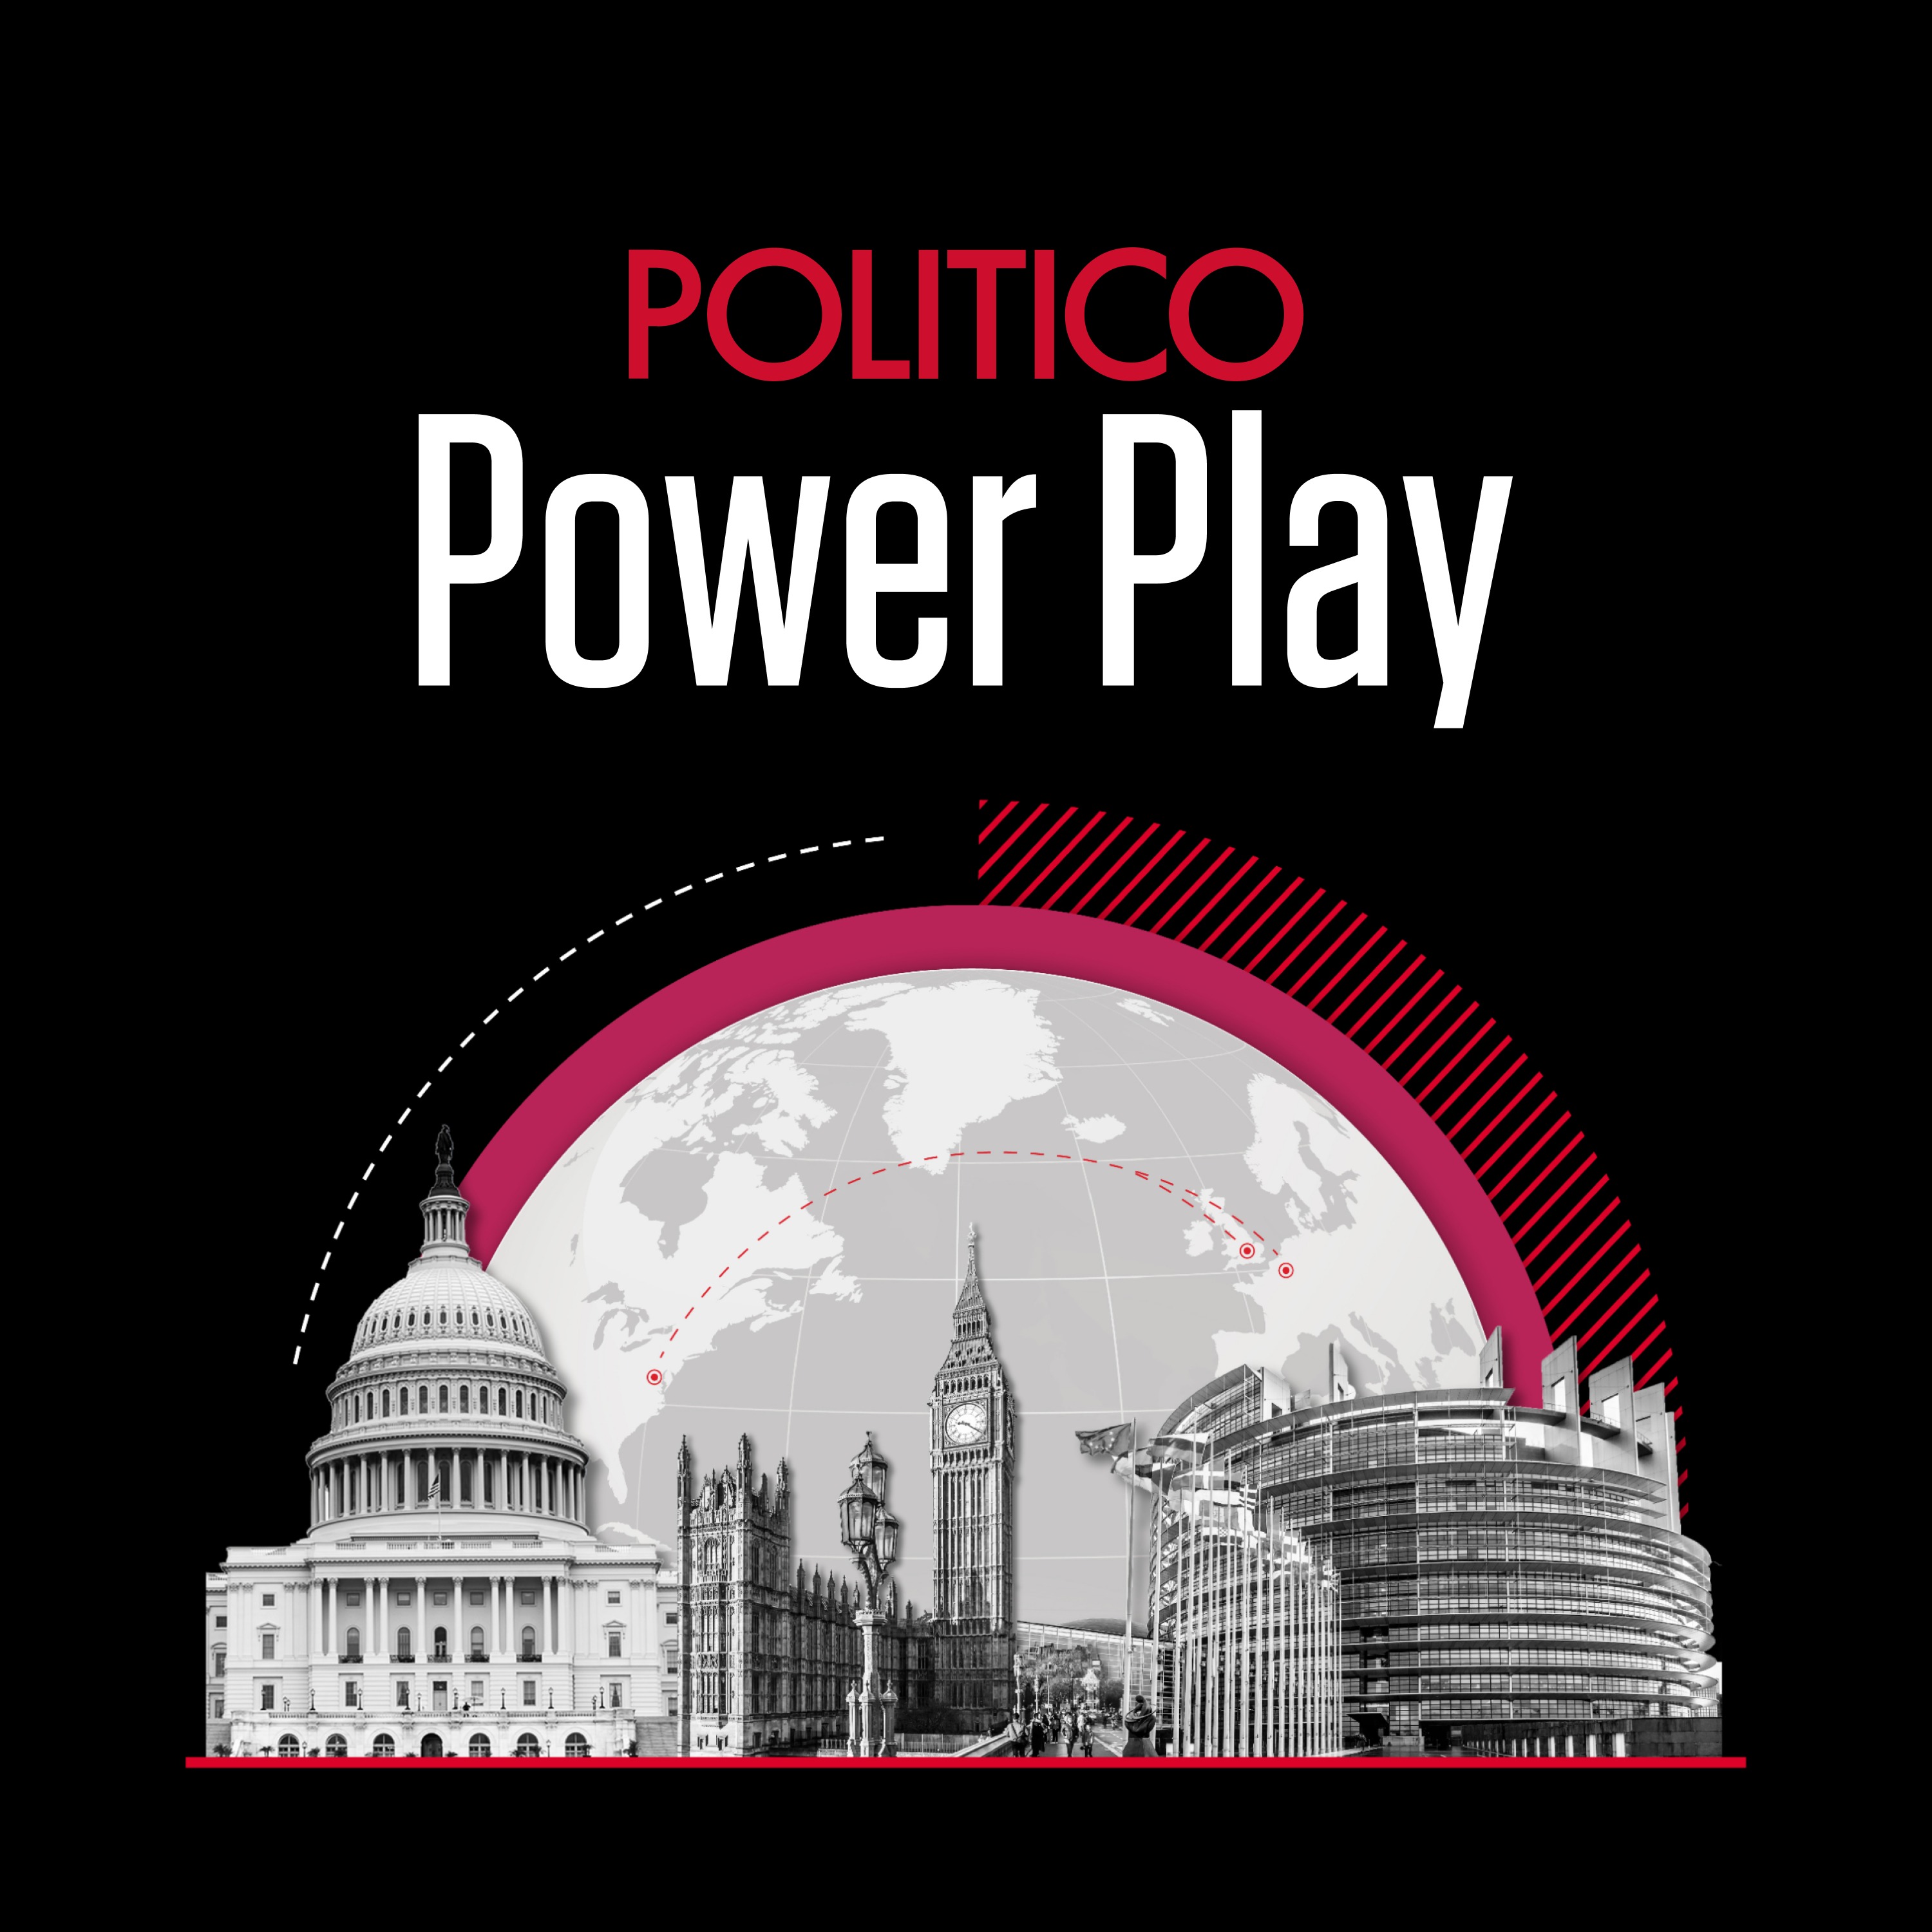 Biden's State of the Union and Trump rematch | Interview with POLITICO's global editor-in-chief